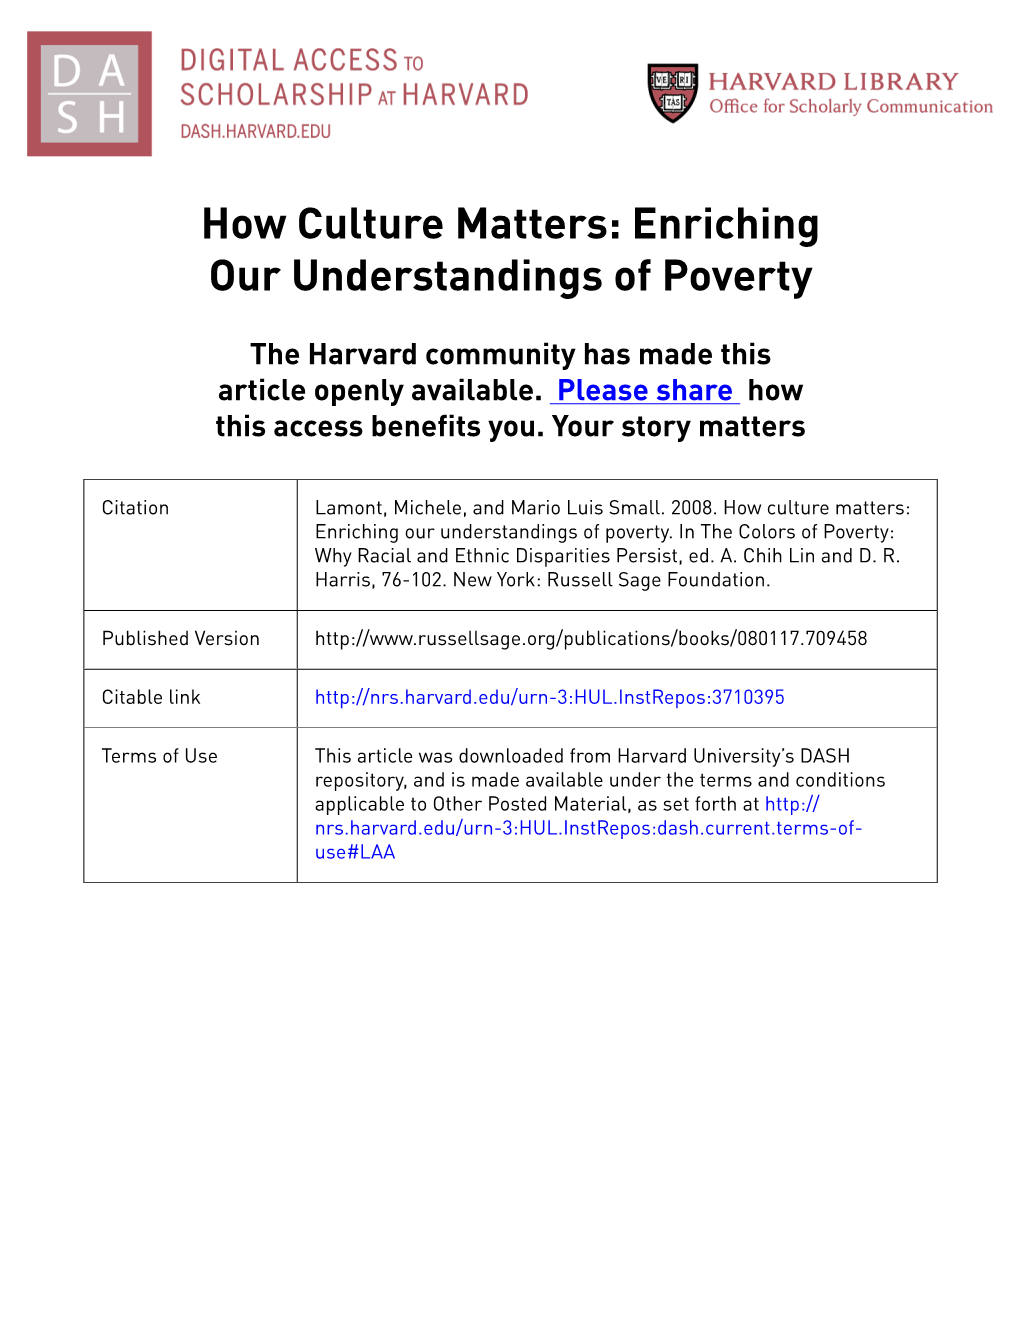 How Culture Matters: Enriching Our Understandings of Poverty